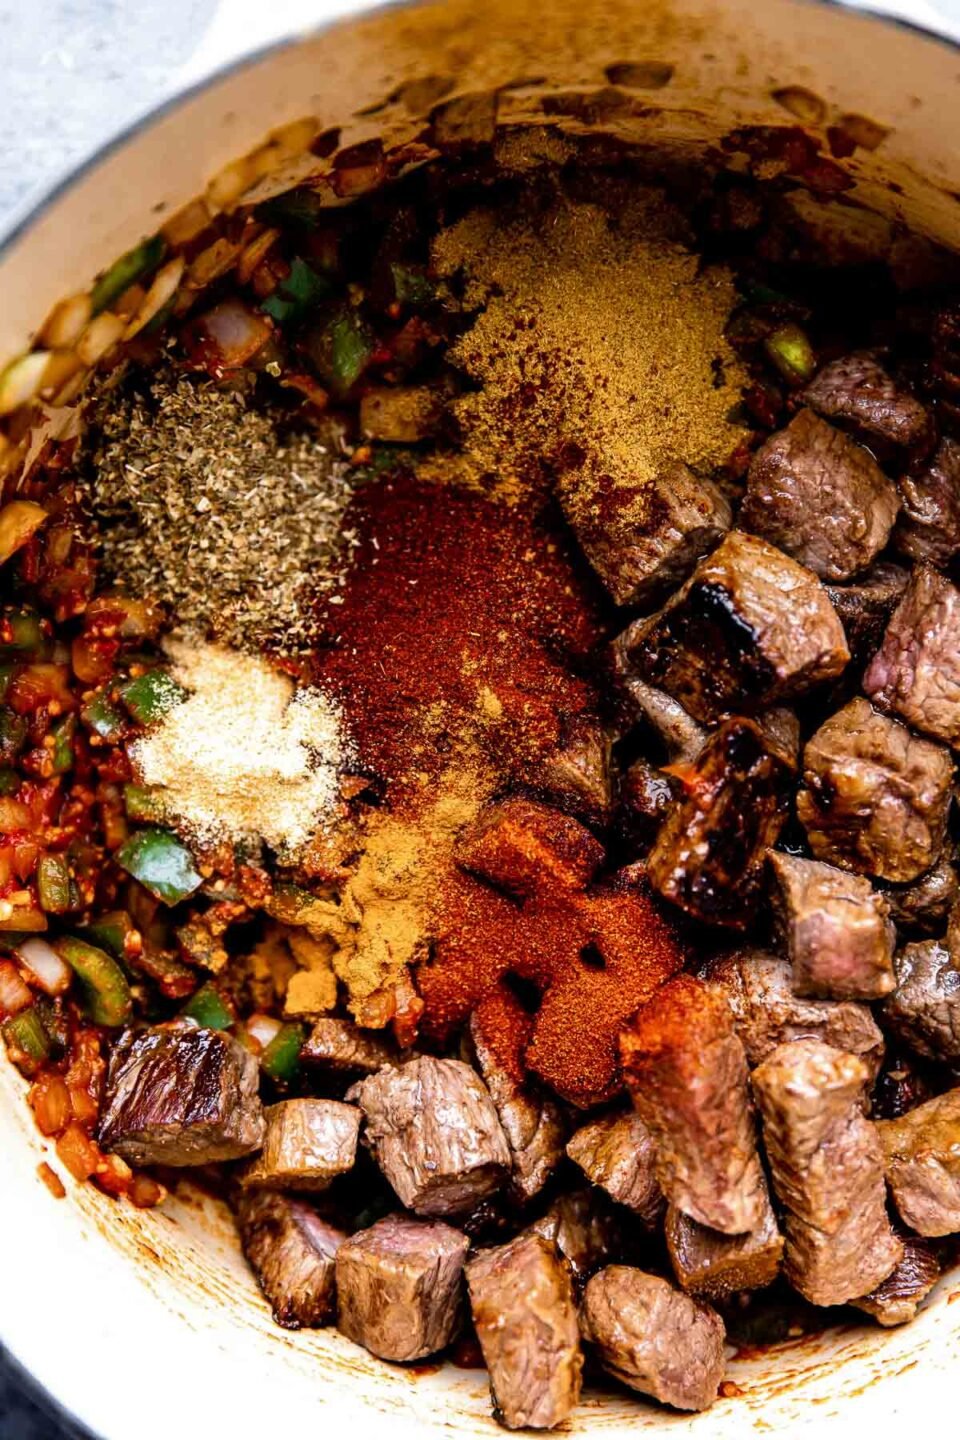 How to make a braised beef chili, step 3: Build the beef chili & braise. Browned beef, vegetables, and chili spices are added into a large pot that sits atop a dark textured surface to begin to build chili with stew meat.